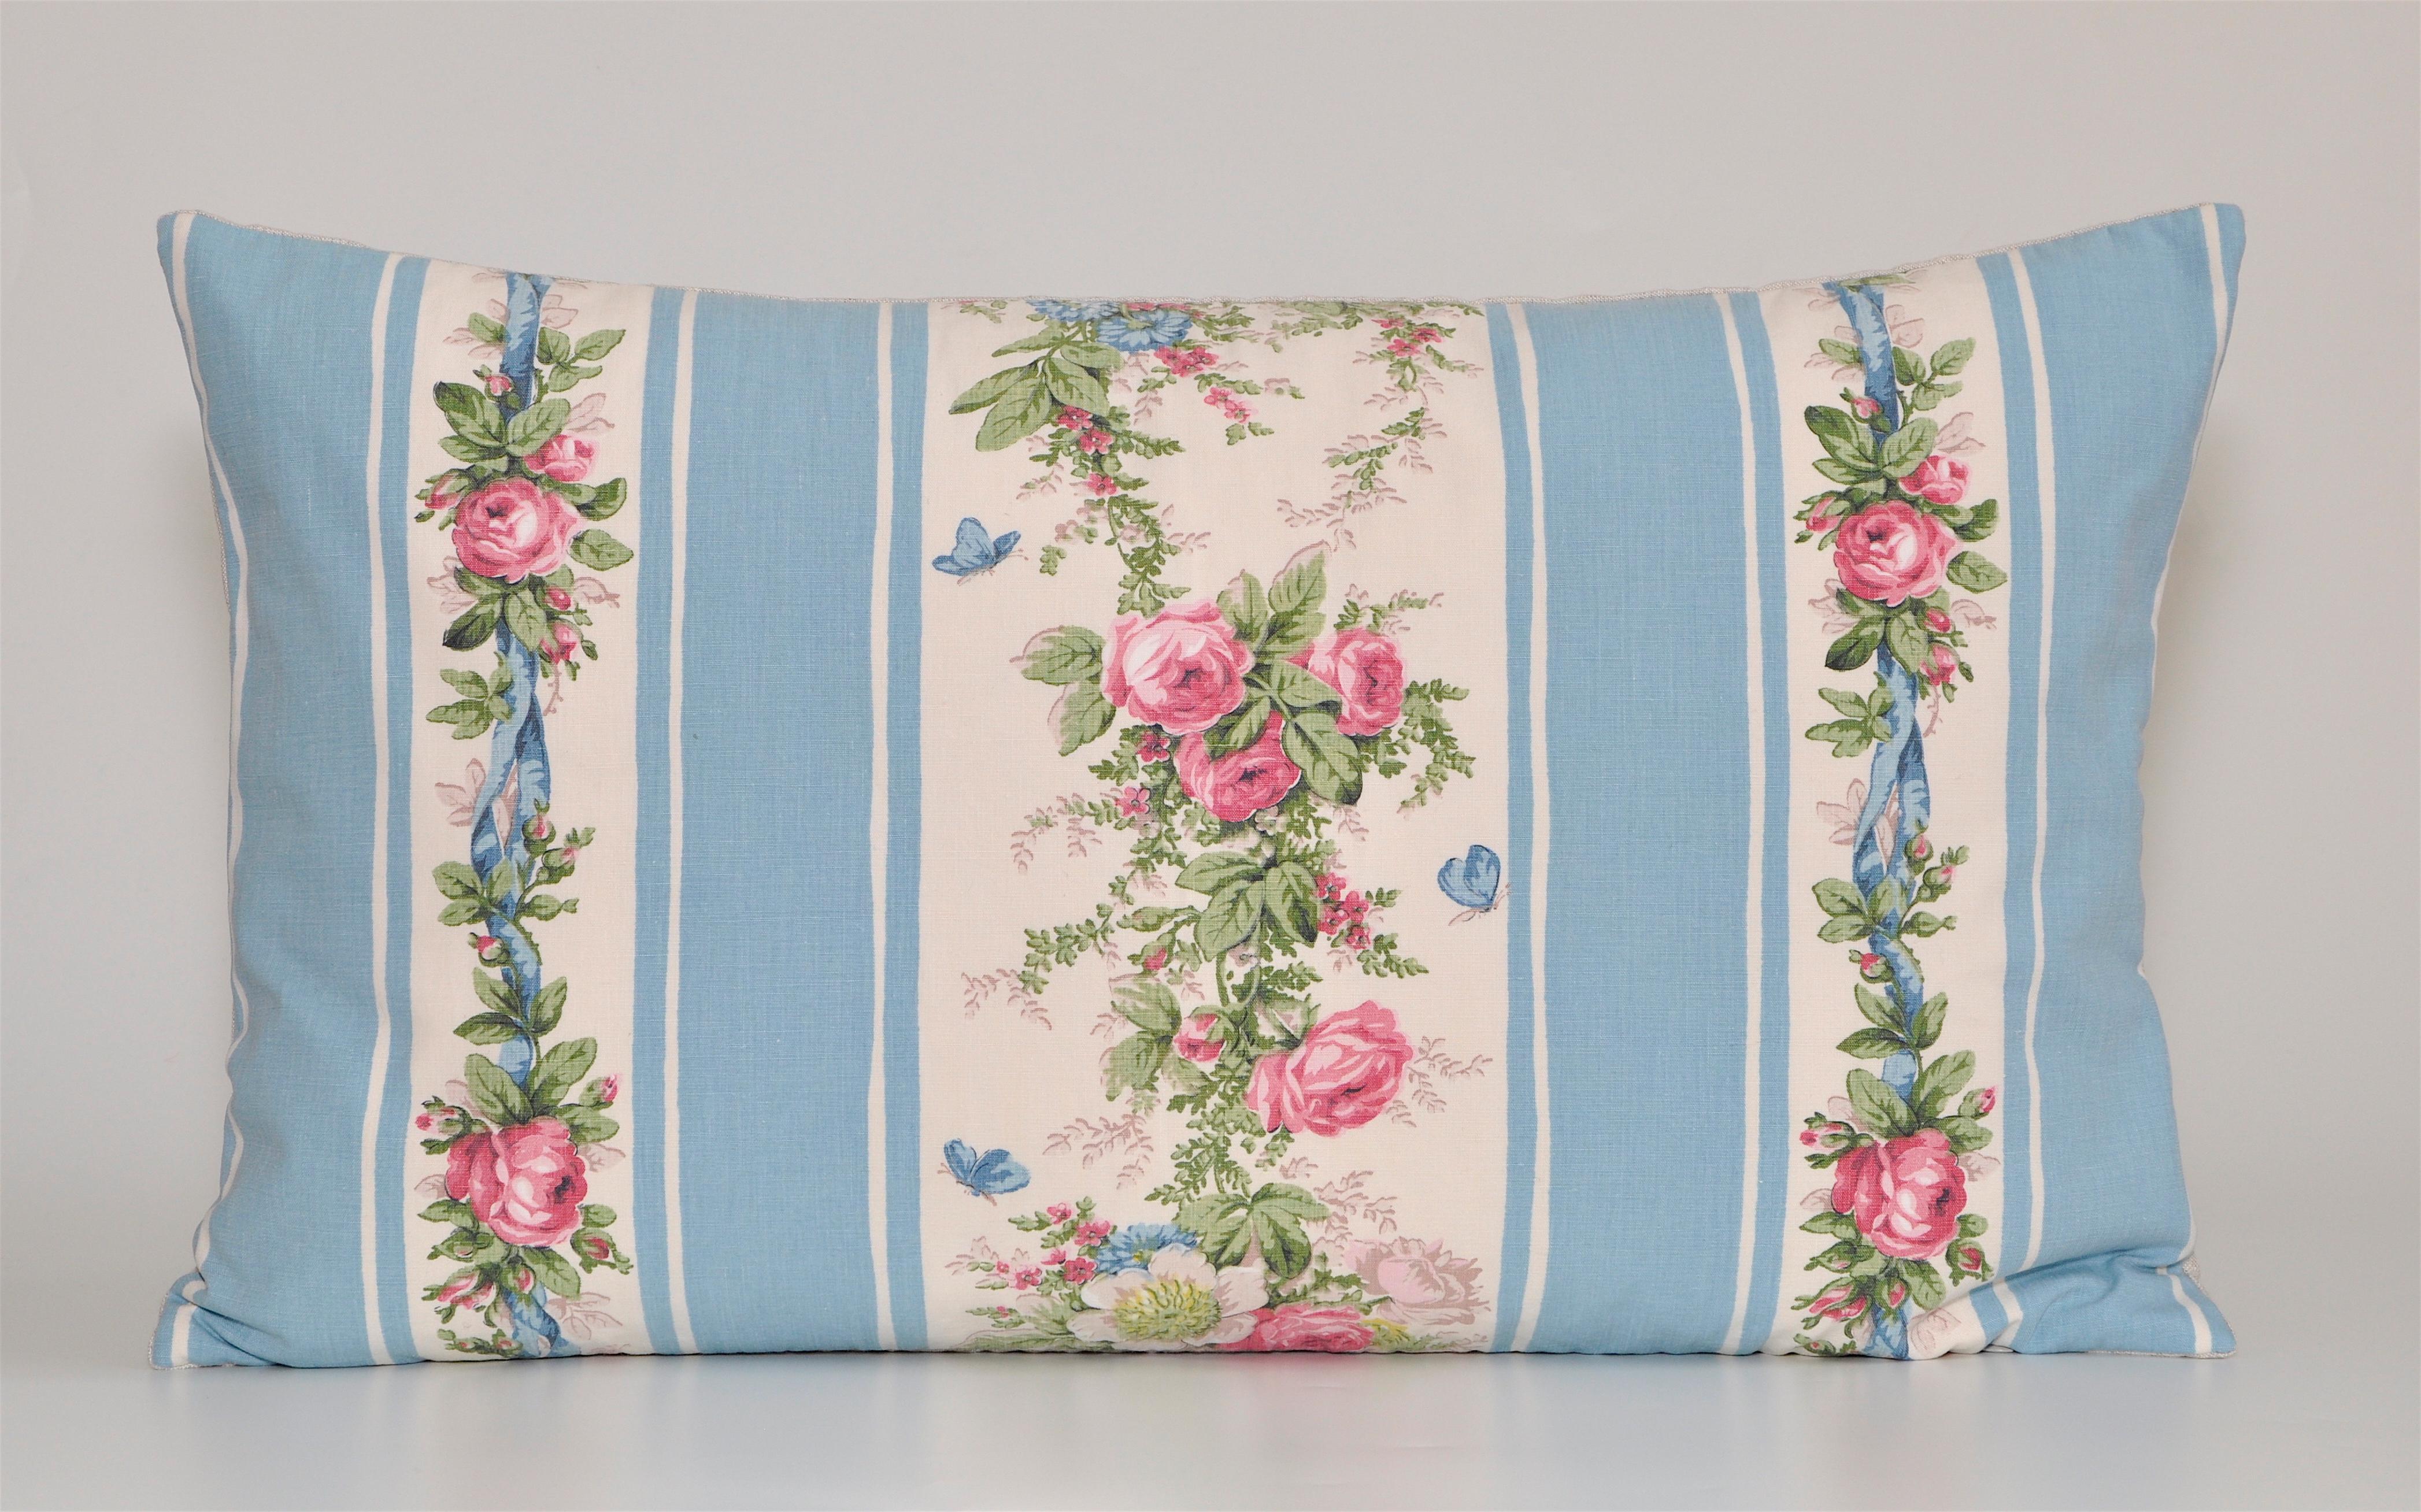 Vintage French Boussac Versailles fabric with Irish linen cushion pillow blue

Custom made luxury cushions created with French vintage ‘Petit Trianon' Boussac fabric from their 'Romanex' collection in pale blue with a beautiful pattern of pretty